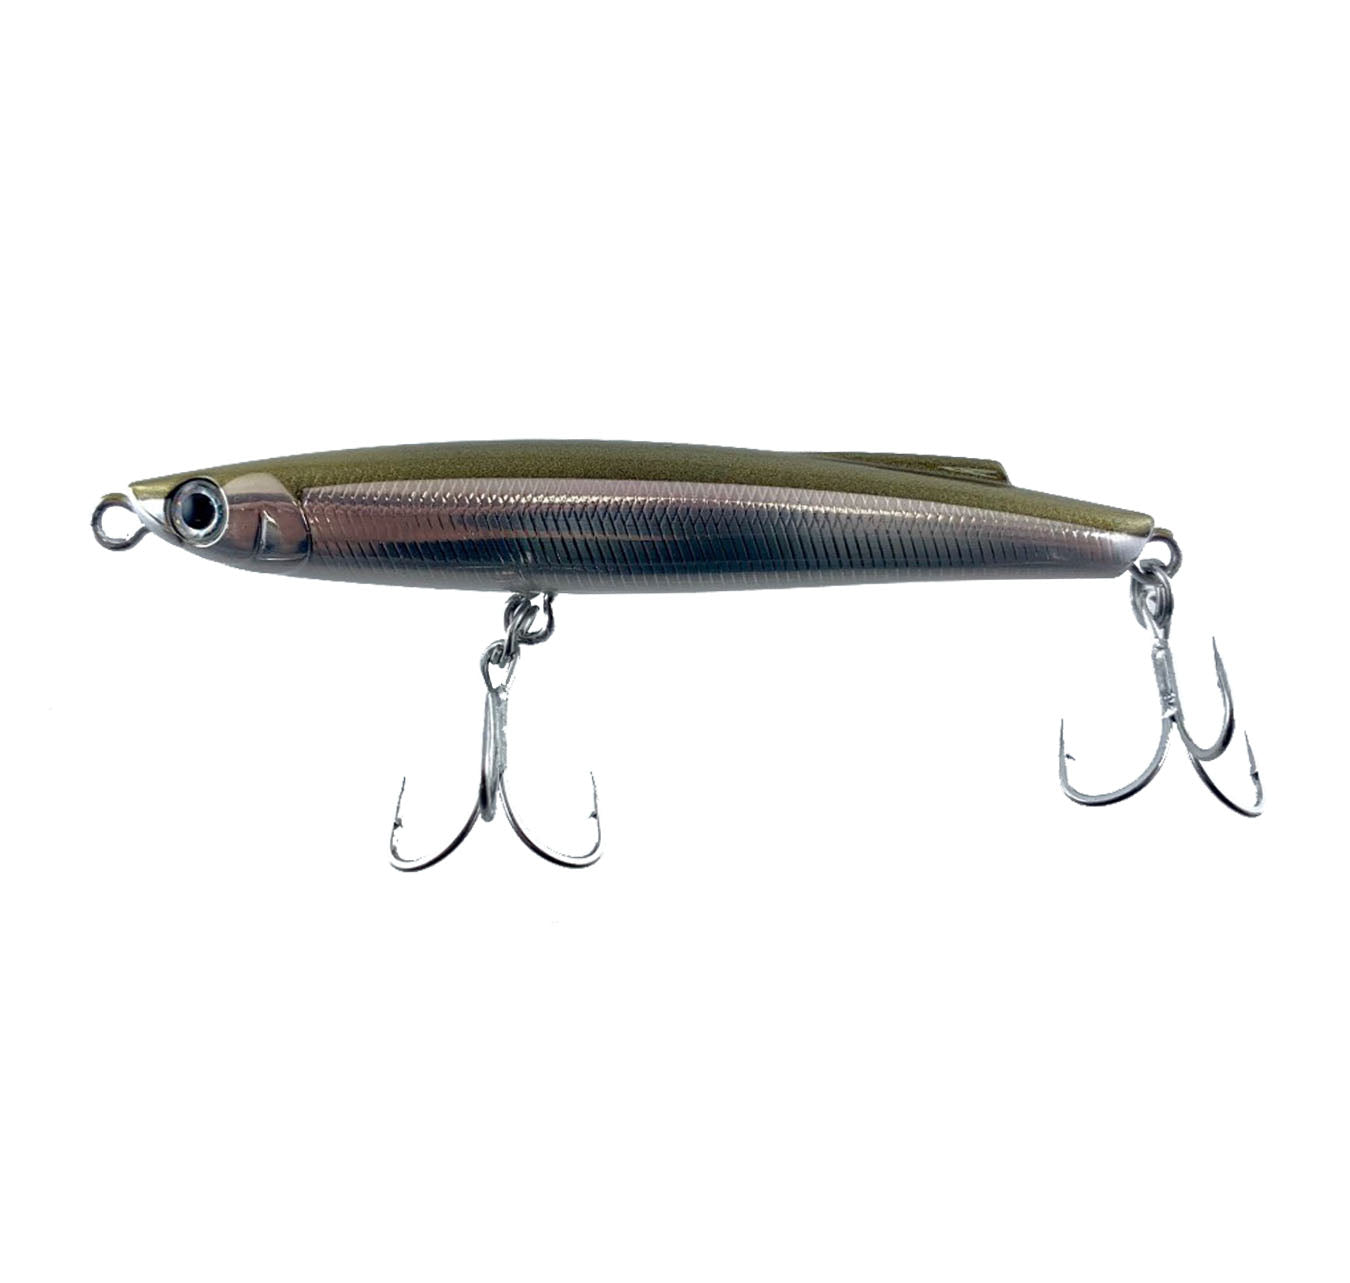 Bassday trout lures, Blog